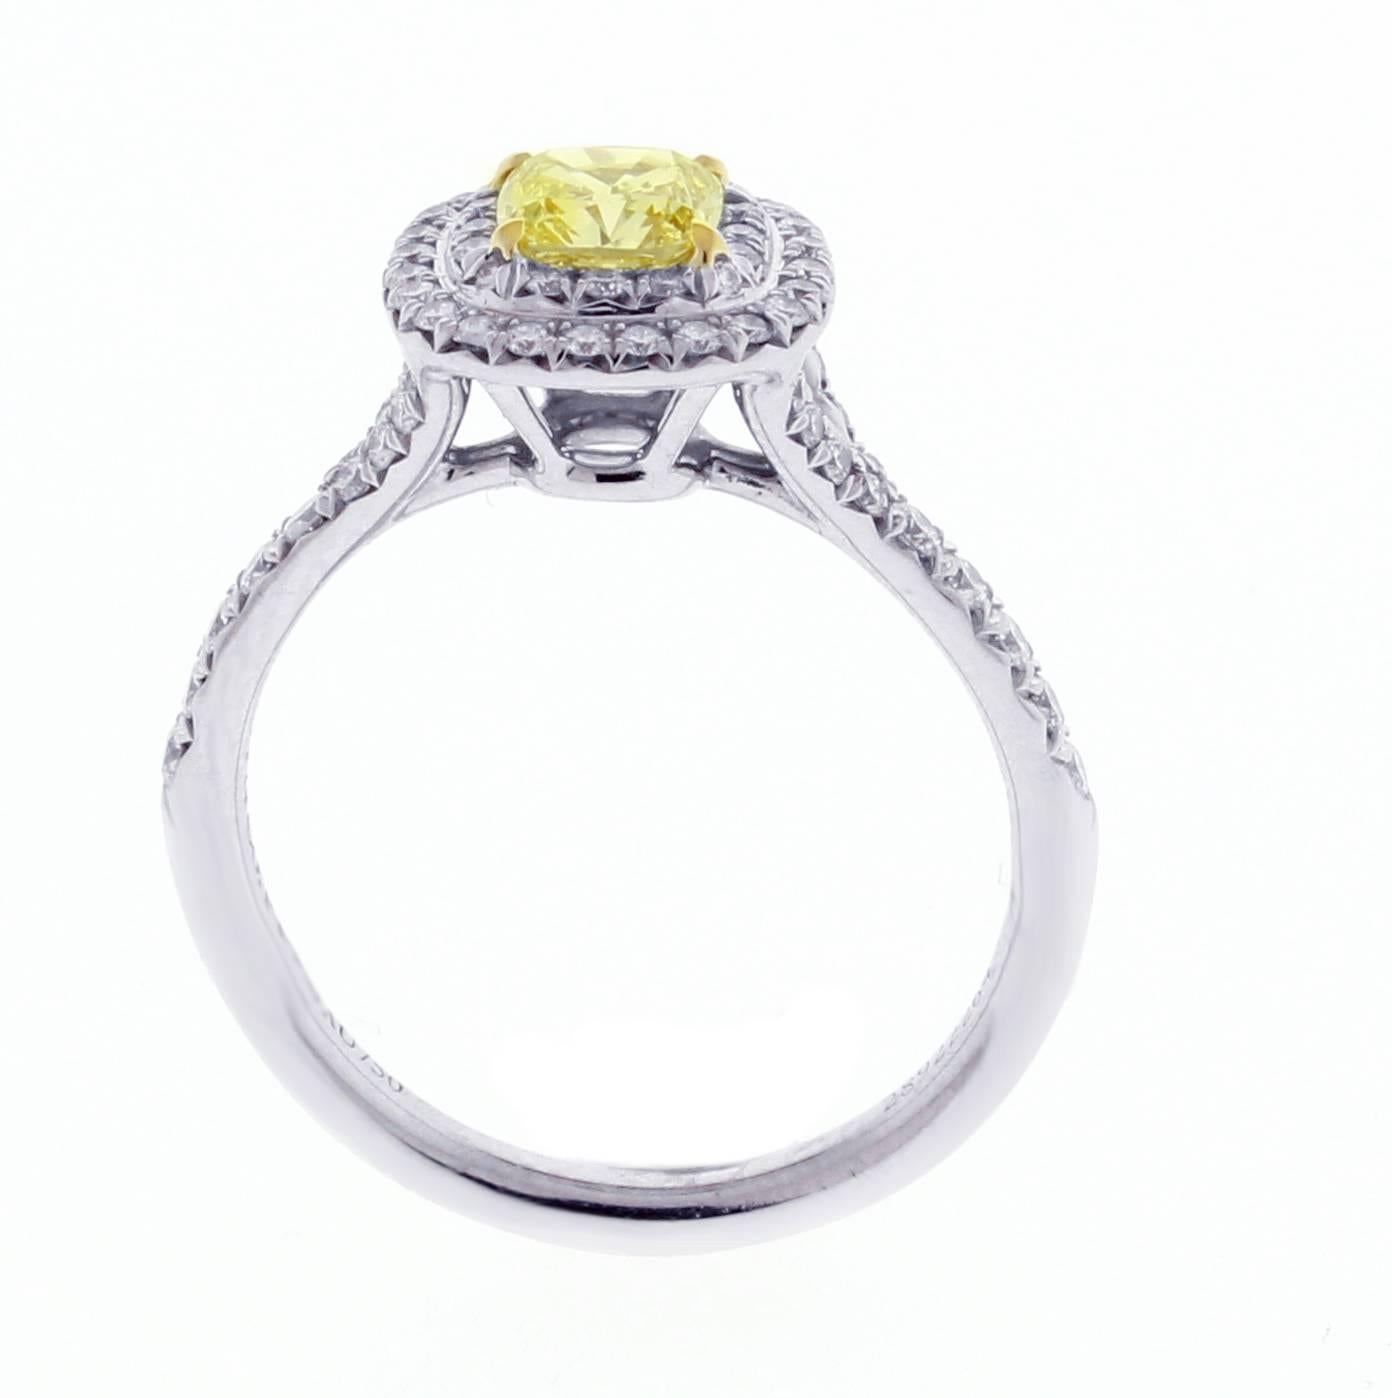 A riveting cushion cut Tiffany Yellow Diamond smolders with the intensity of sunlight.  The Fancy Intense Yellow  cushion cut diamond weighs .66 carats, with round brilliant white diamonds, weighing .36 carats. Ring in platinum and 18k gold, size,